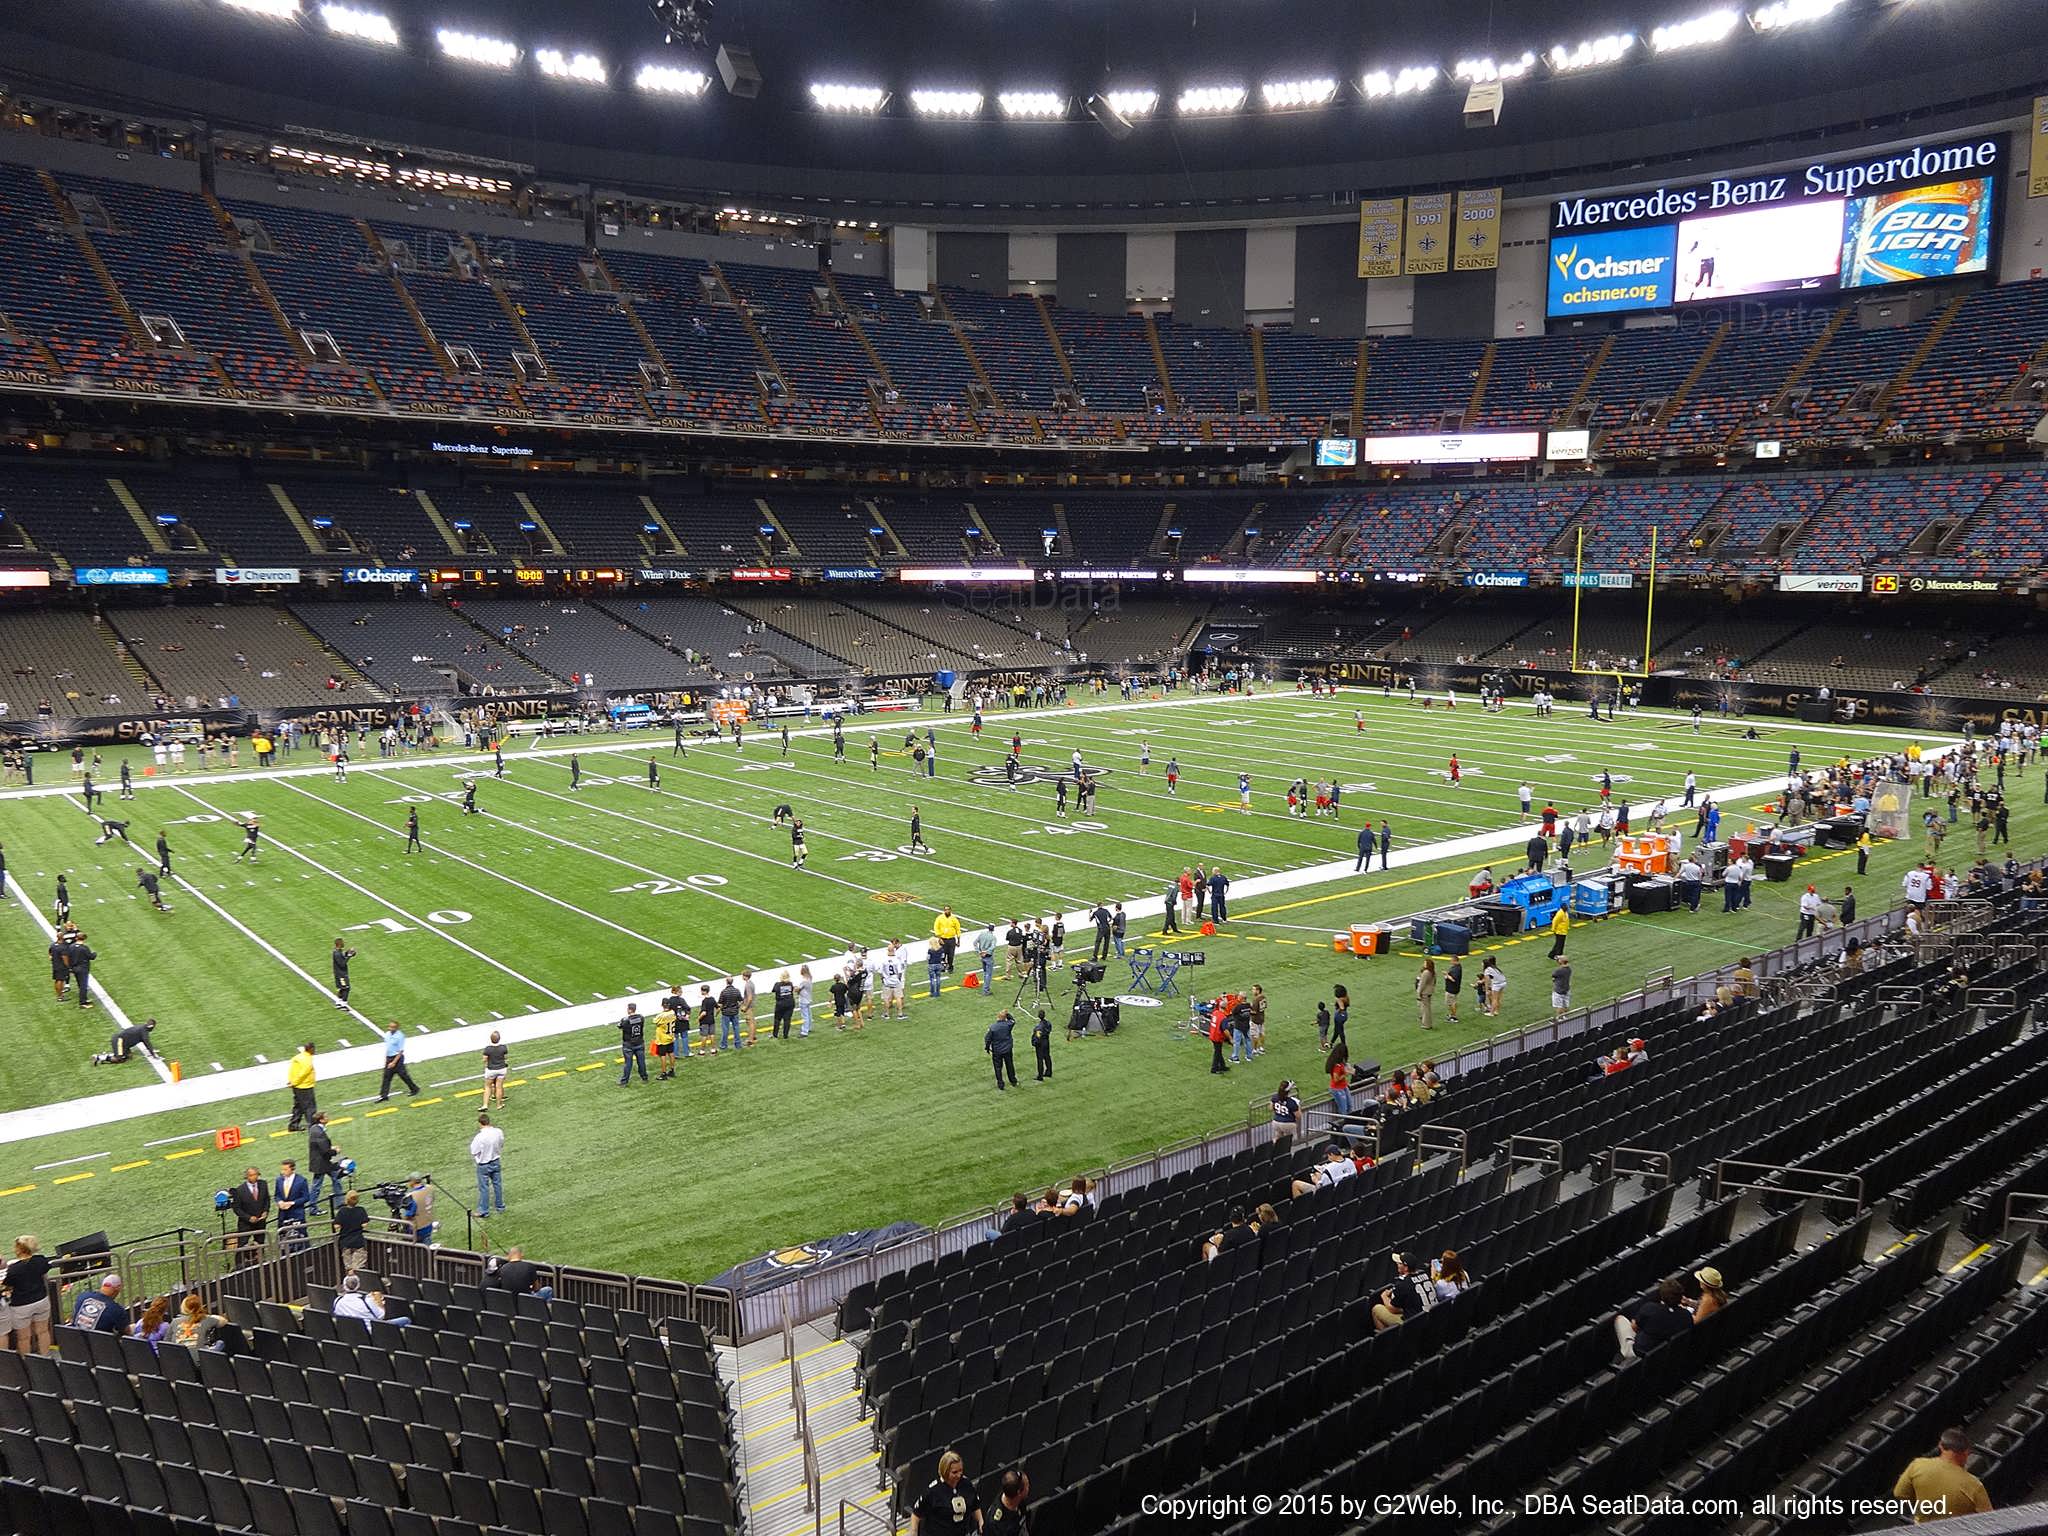 Seat view from section 231 at the Mercedes-Benz Superdome, home of the New Orleans Saints